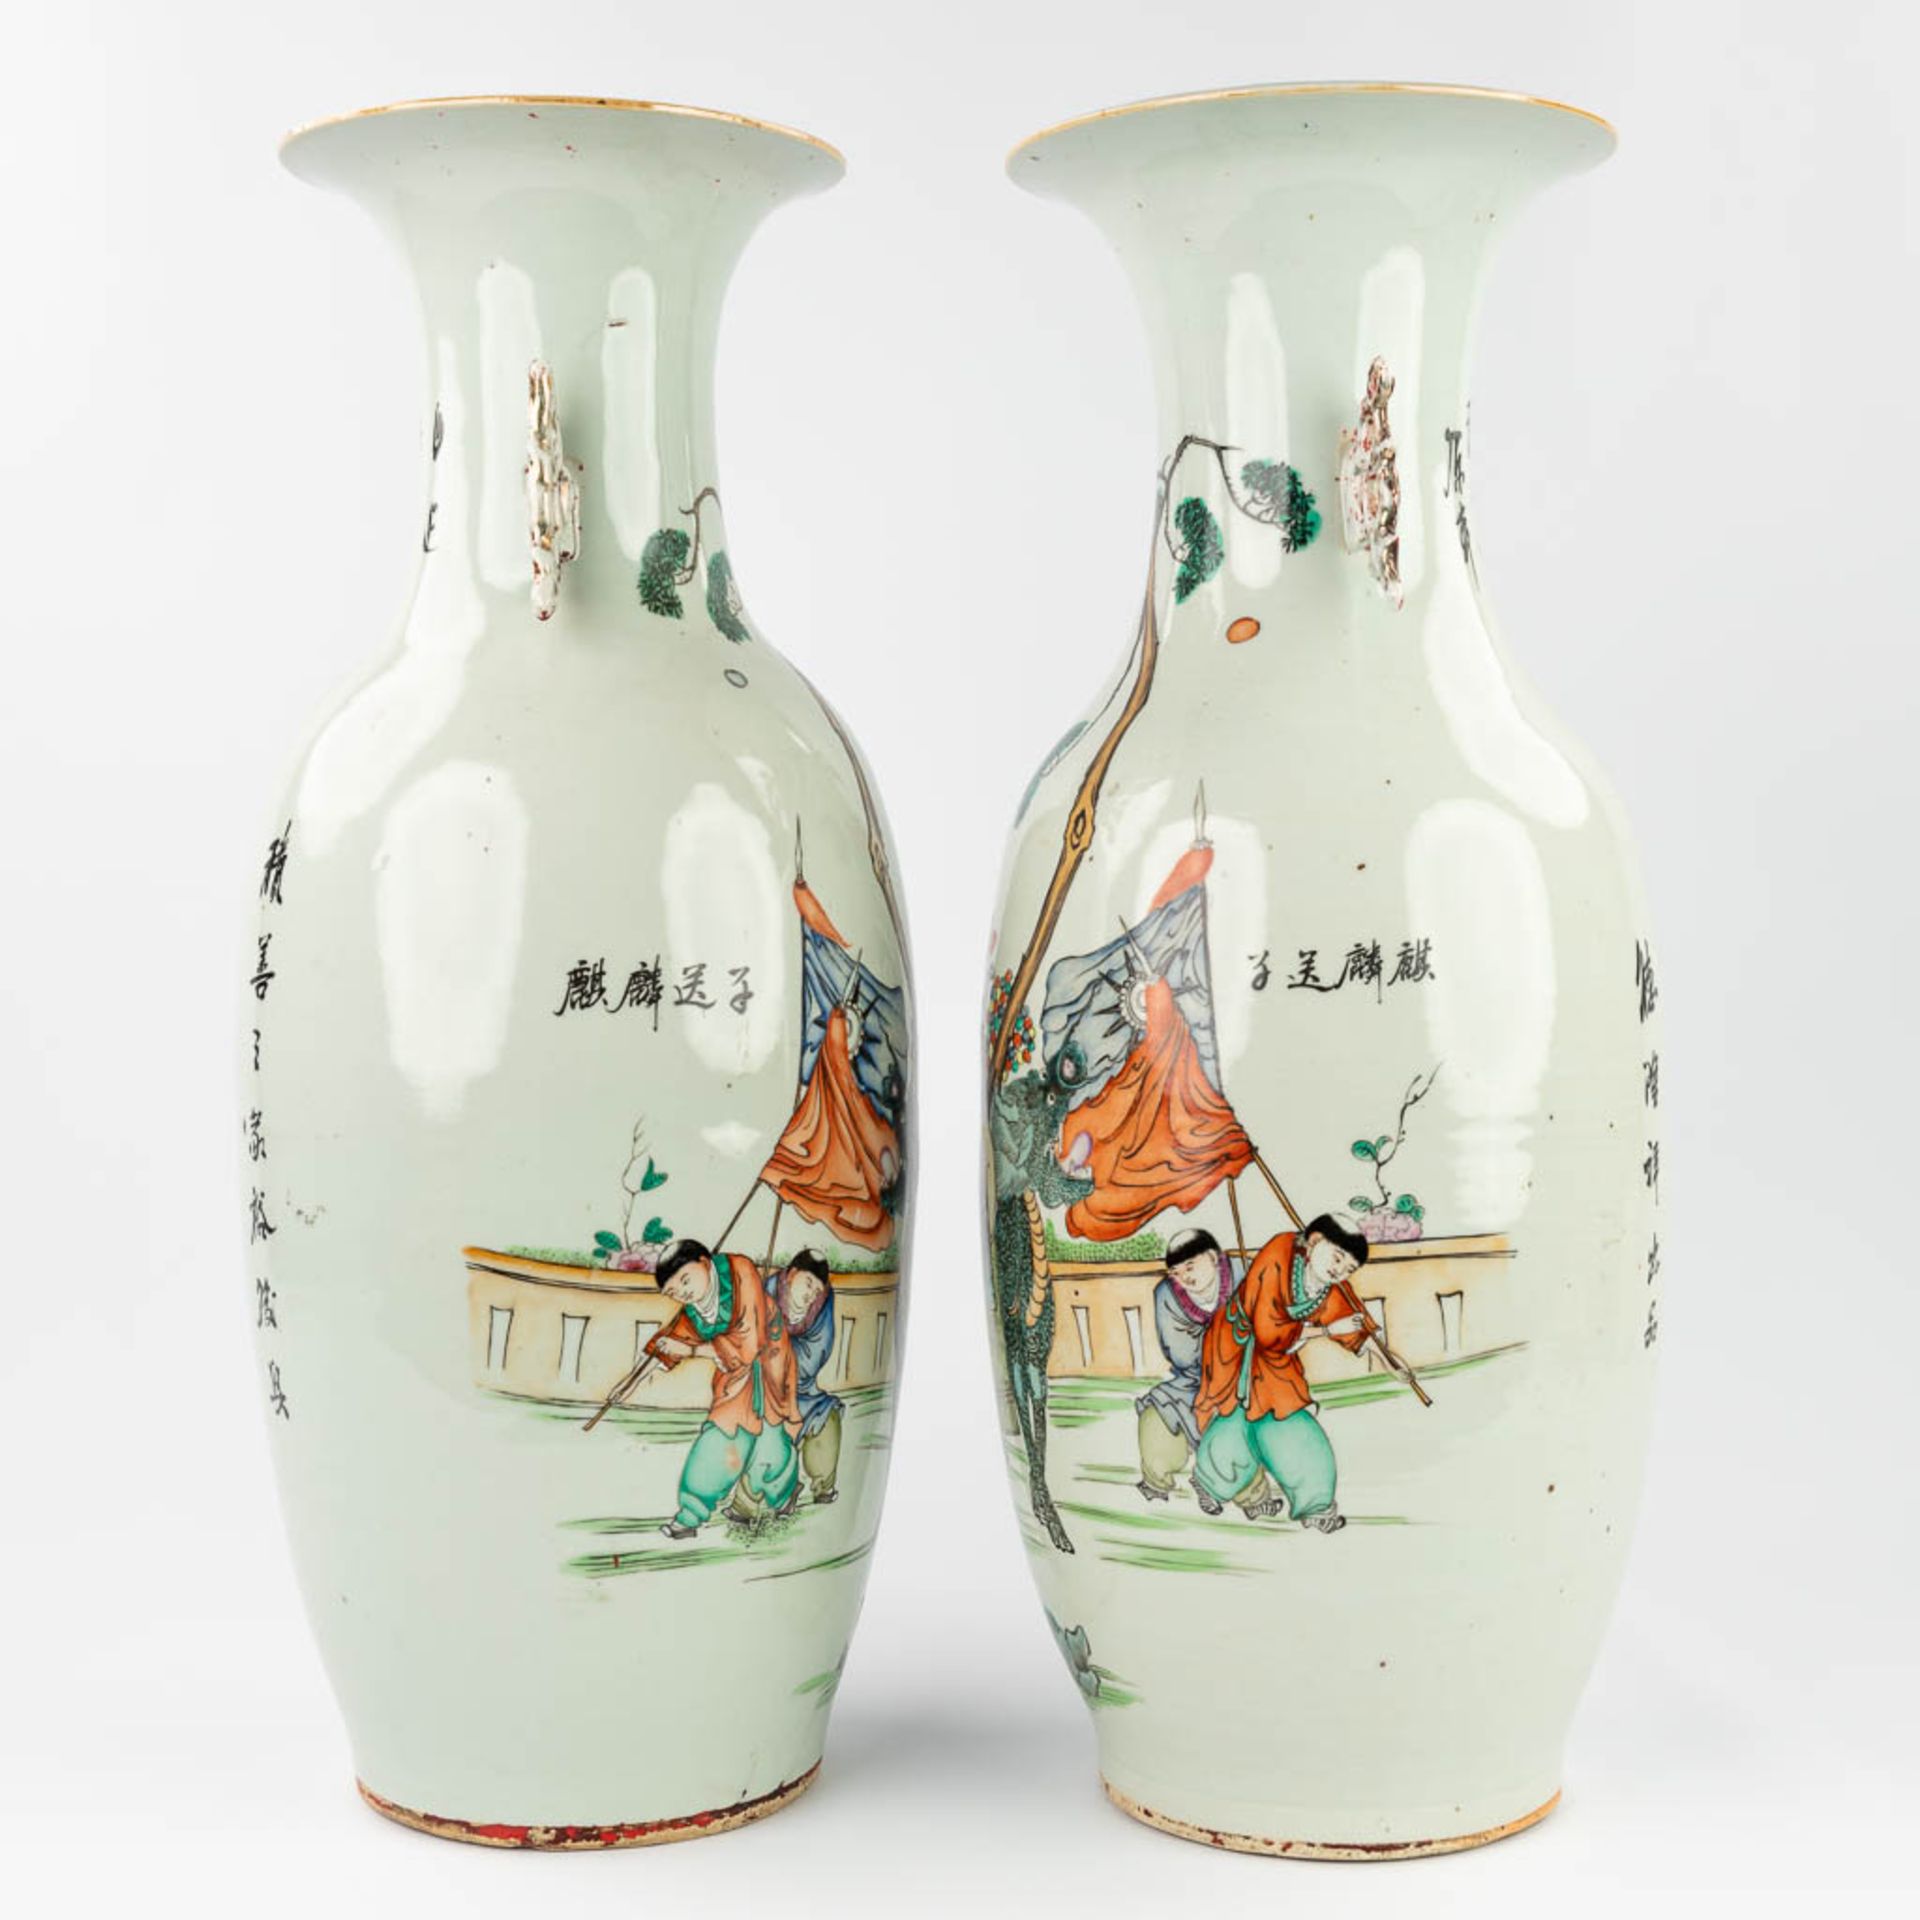 A pair of Chinese vases made of porcelain and decorated with mythological figurines. (58 x 22 cm) - Image 10 of 13